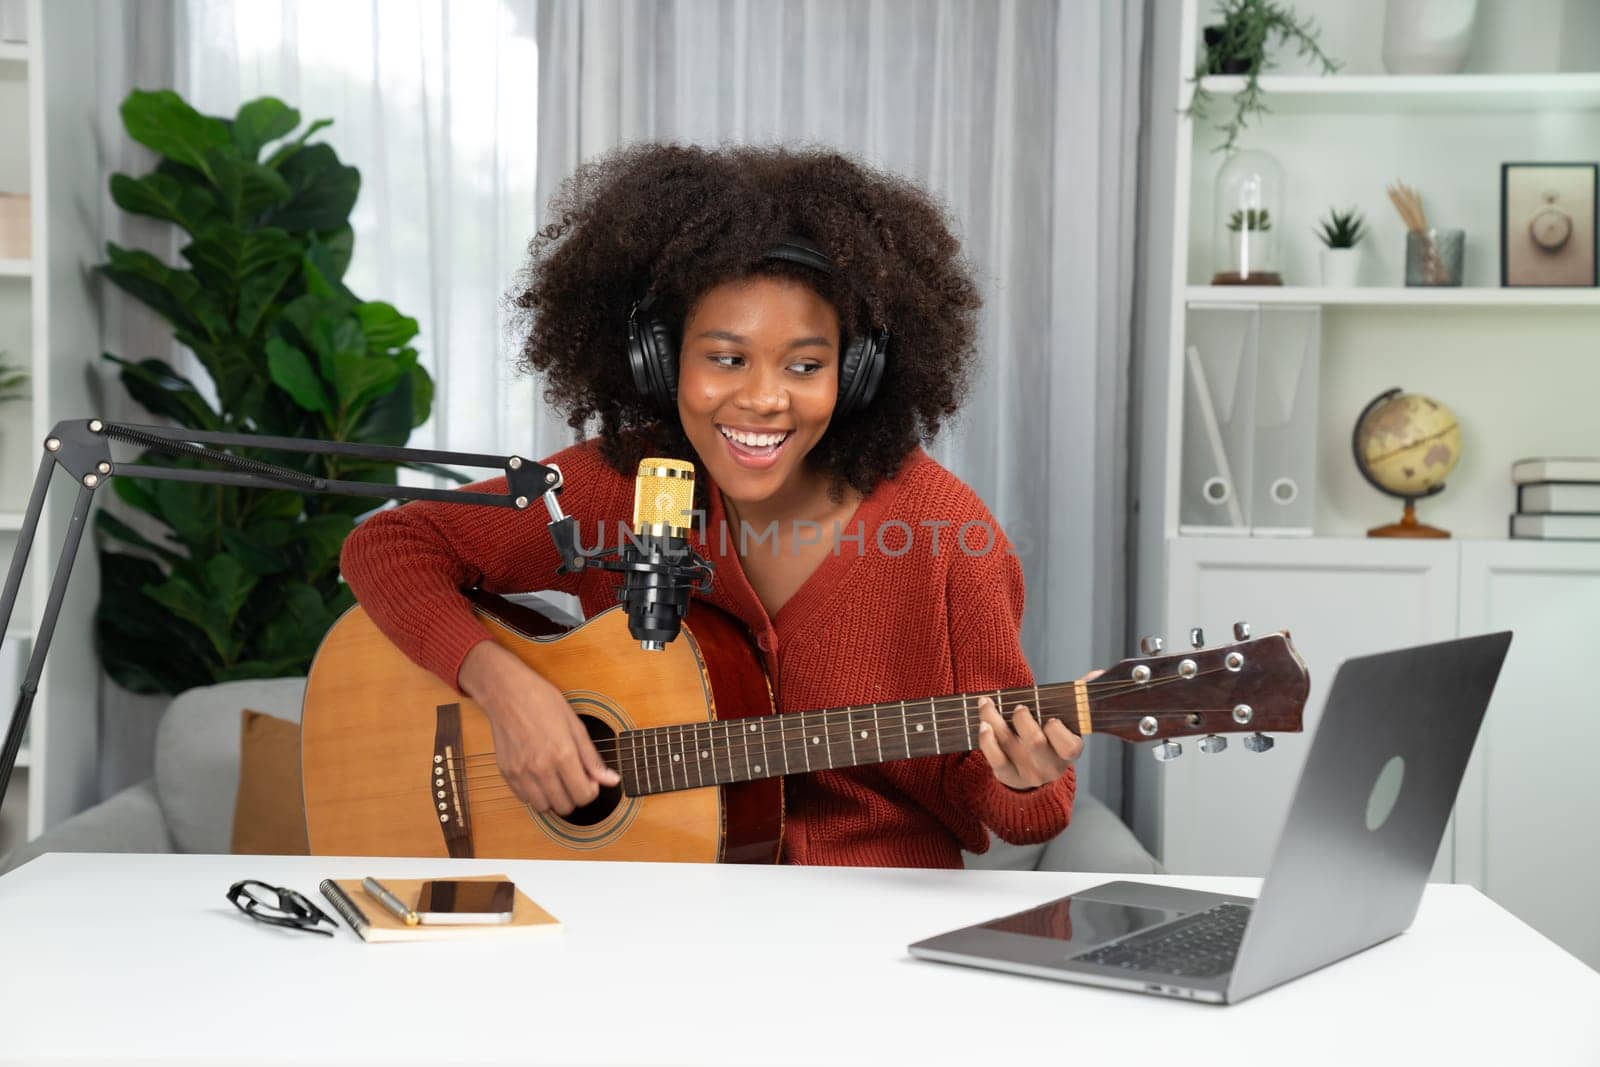 Host channel in musician of young African American playing guitar along with singing, broadcasting on laptop in studio. Decoration of equipment of headsets and recording microphone. Tastemaker.